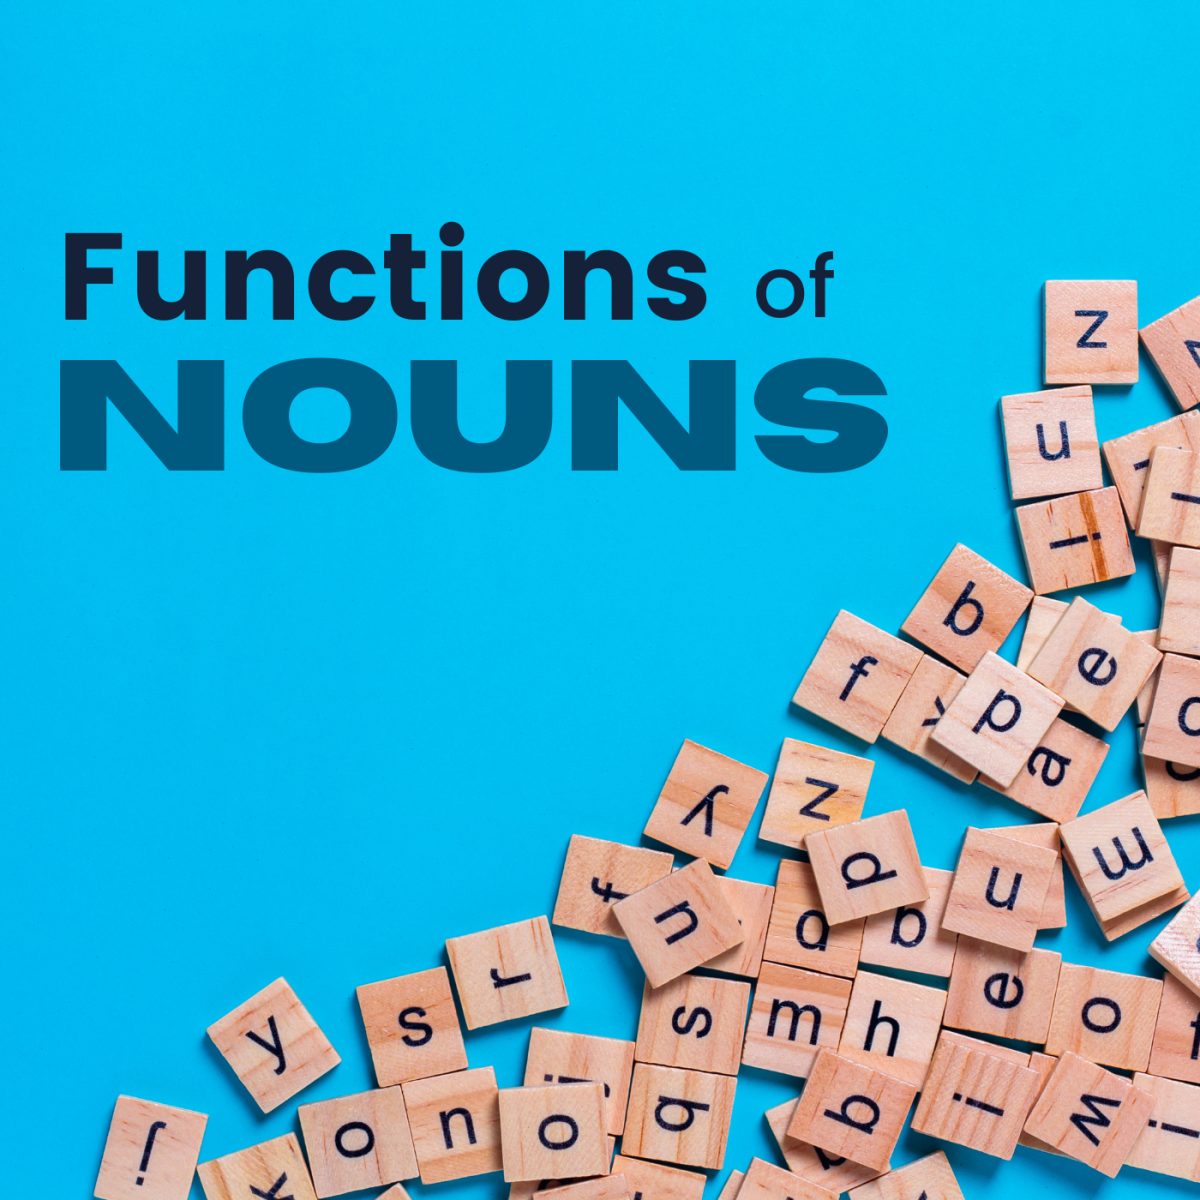 Functions of Nouns: Definitions, Examples, and More